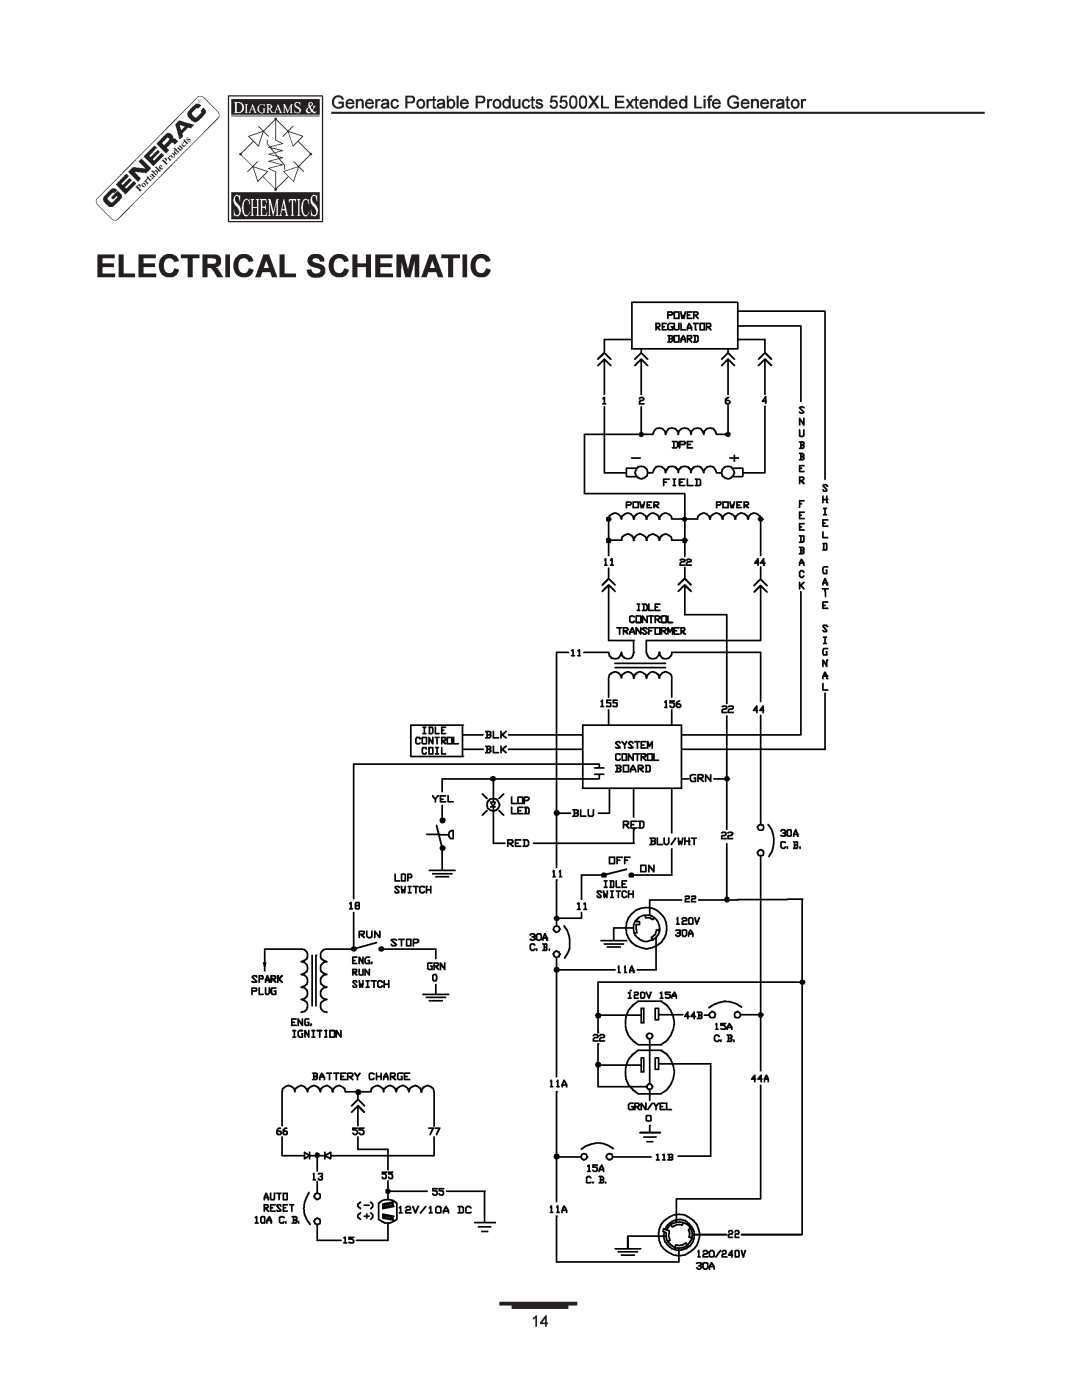 Generac manual Electrical Schematic, Generac Portable Products 5500XL Extended Life Generator 